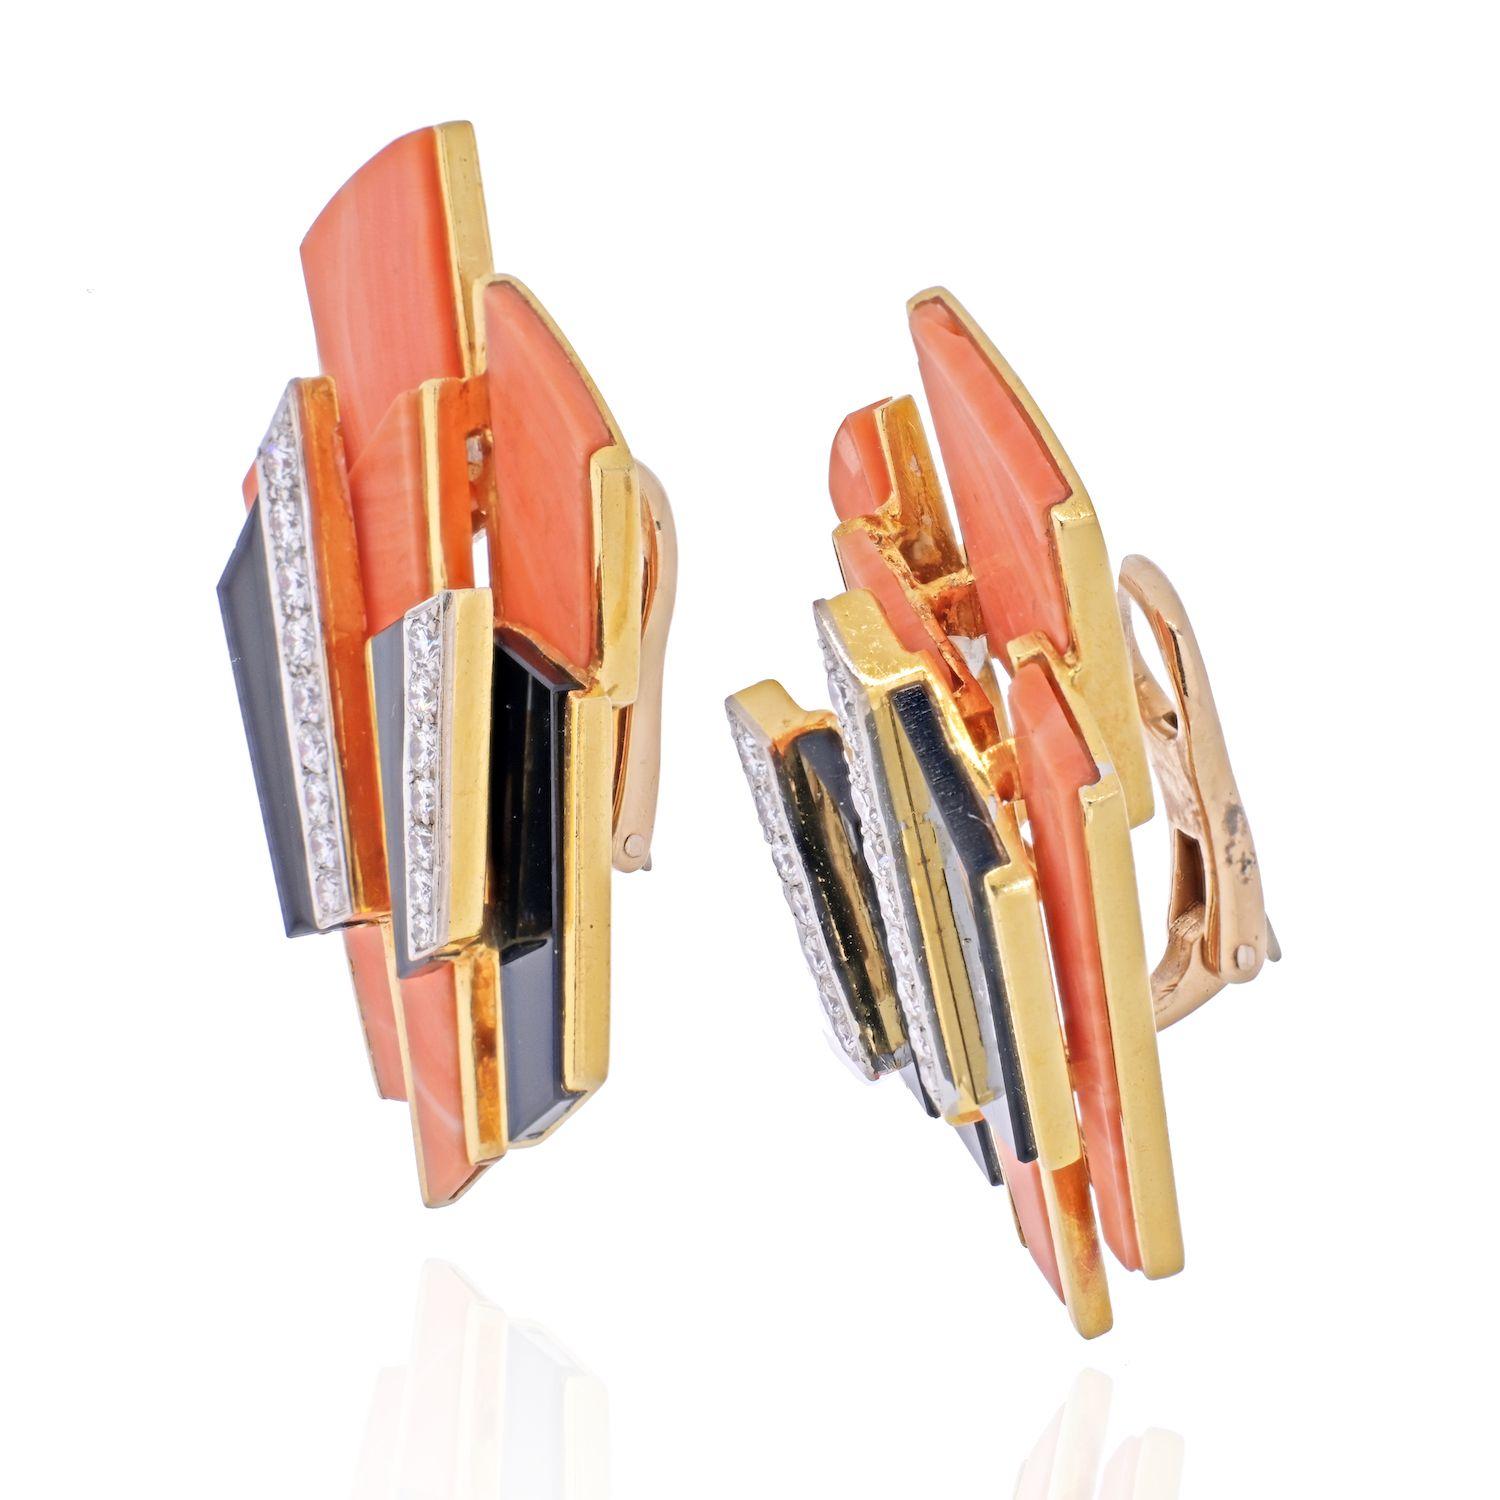 Kutchinsky Vintage 1.30ctw VS1-VS2/G-H Diamond, Coral & Onyx Solid 18K Yellow Gold Ear Clips.

House of Kutchinsky earrings were finely crafted of solid 18k yellow gold. 

The earrings are decorated with inset genuine coral and onyx, and are